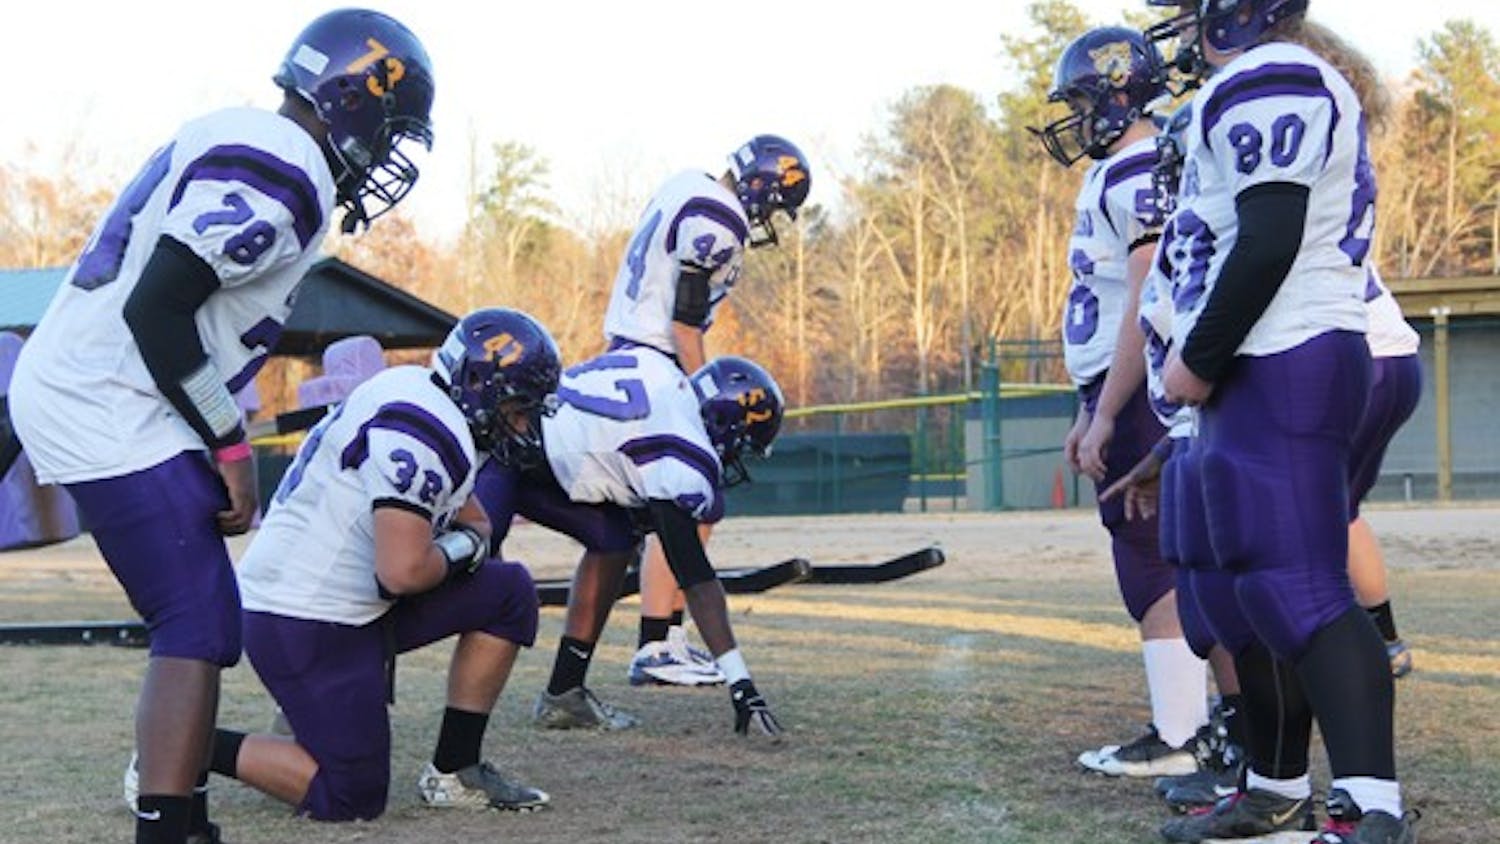 The Carrboro High football team is playing in the state championship on Friday, after only having a football program for 6 years. They are practicing hard this week in preparation for the big game.